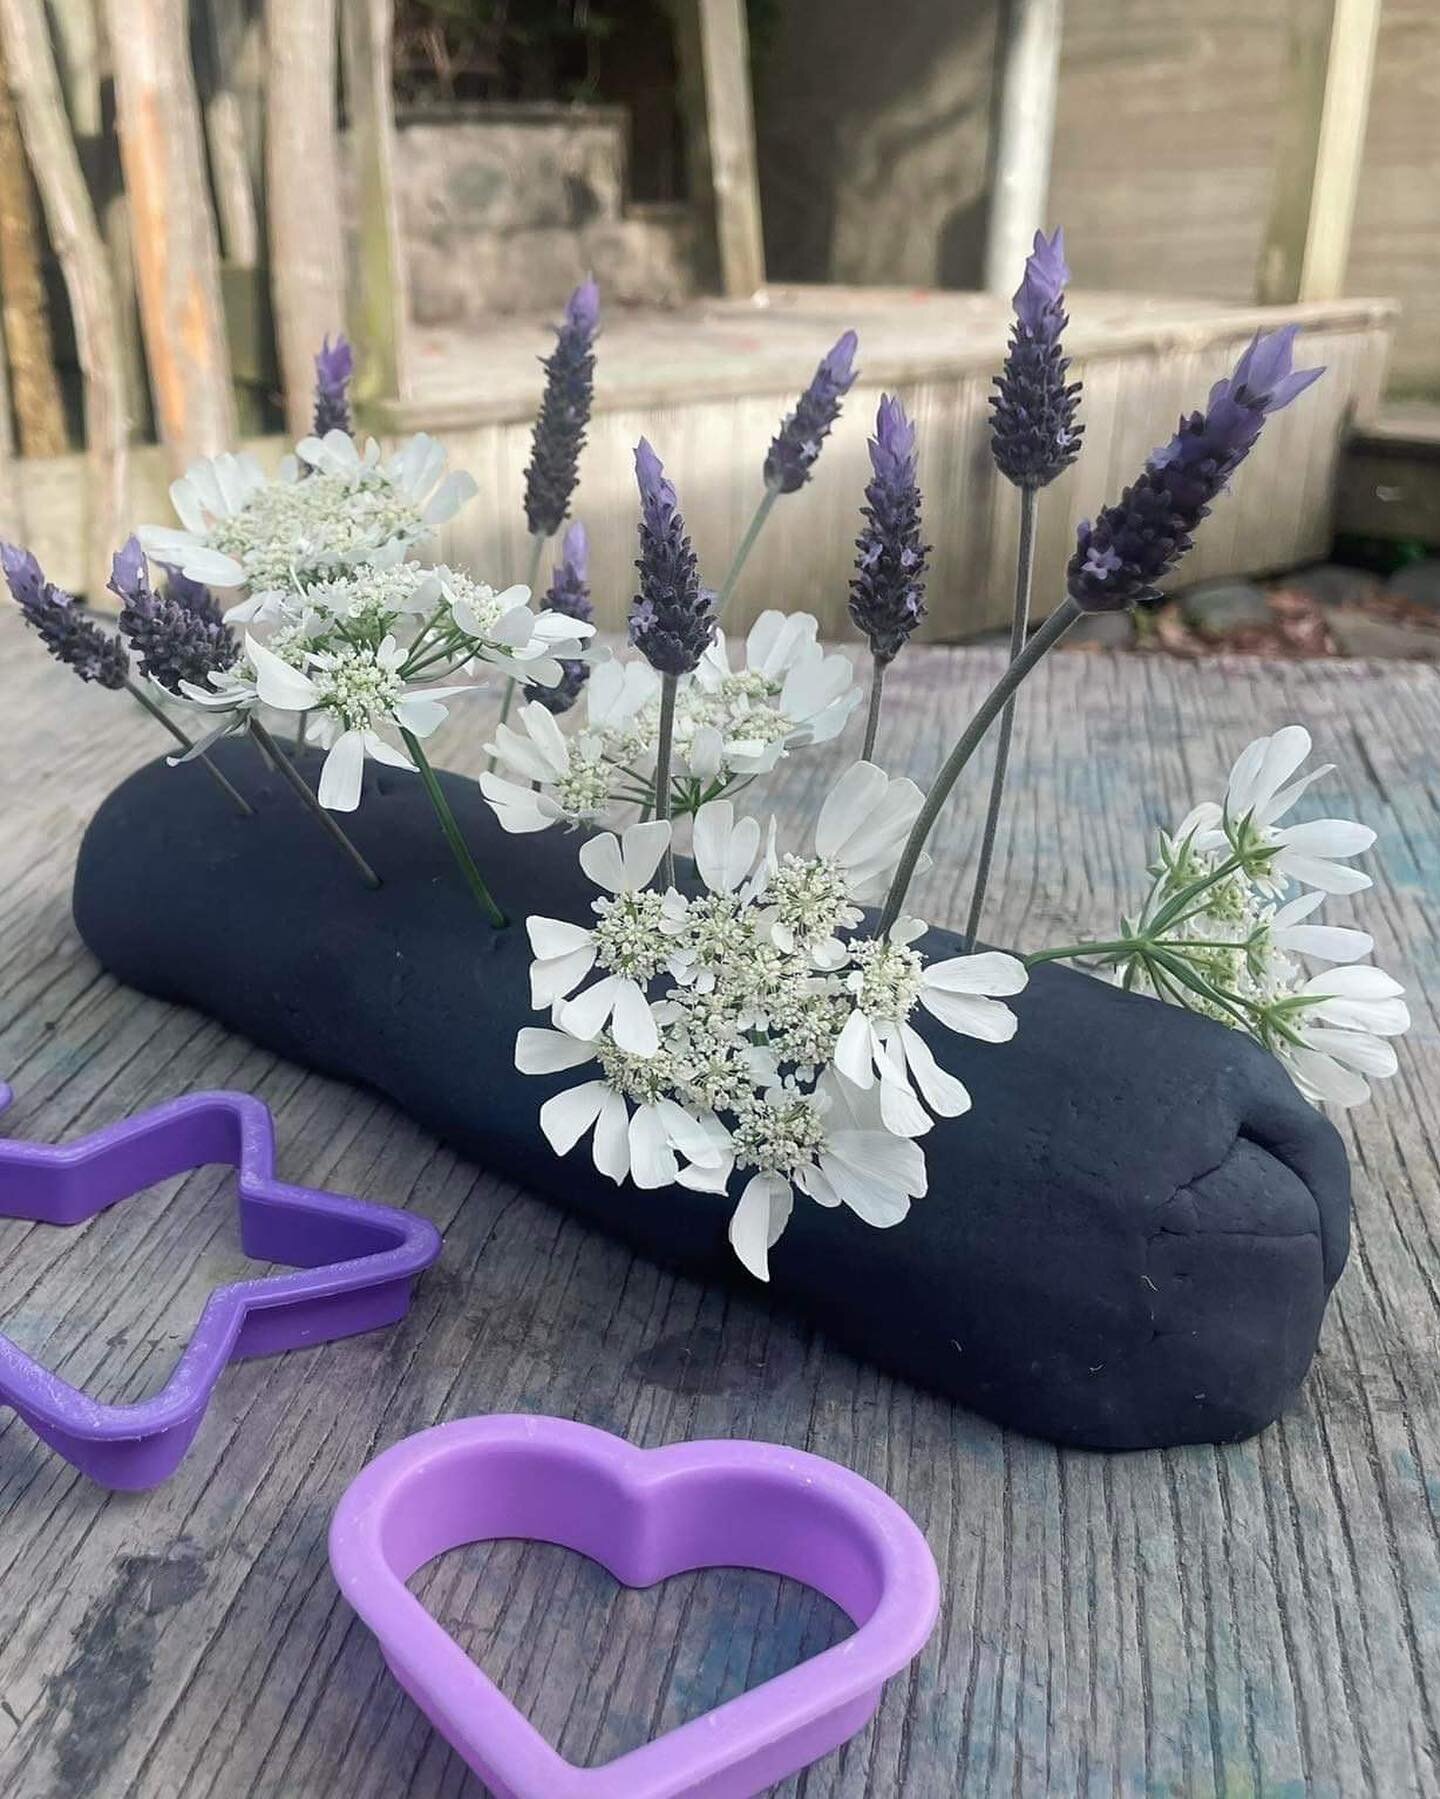 Black play dough with mint essence. 
Lavenders used as another scent to add with the play dough scent. White flowers for contrast.  Children made there own &lsquo;flower gardens&rsquo; out of different shapes.
#playdoughadventures #sensoryplay #tuiea